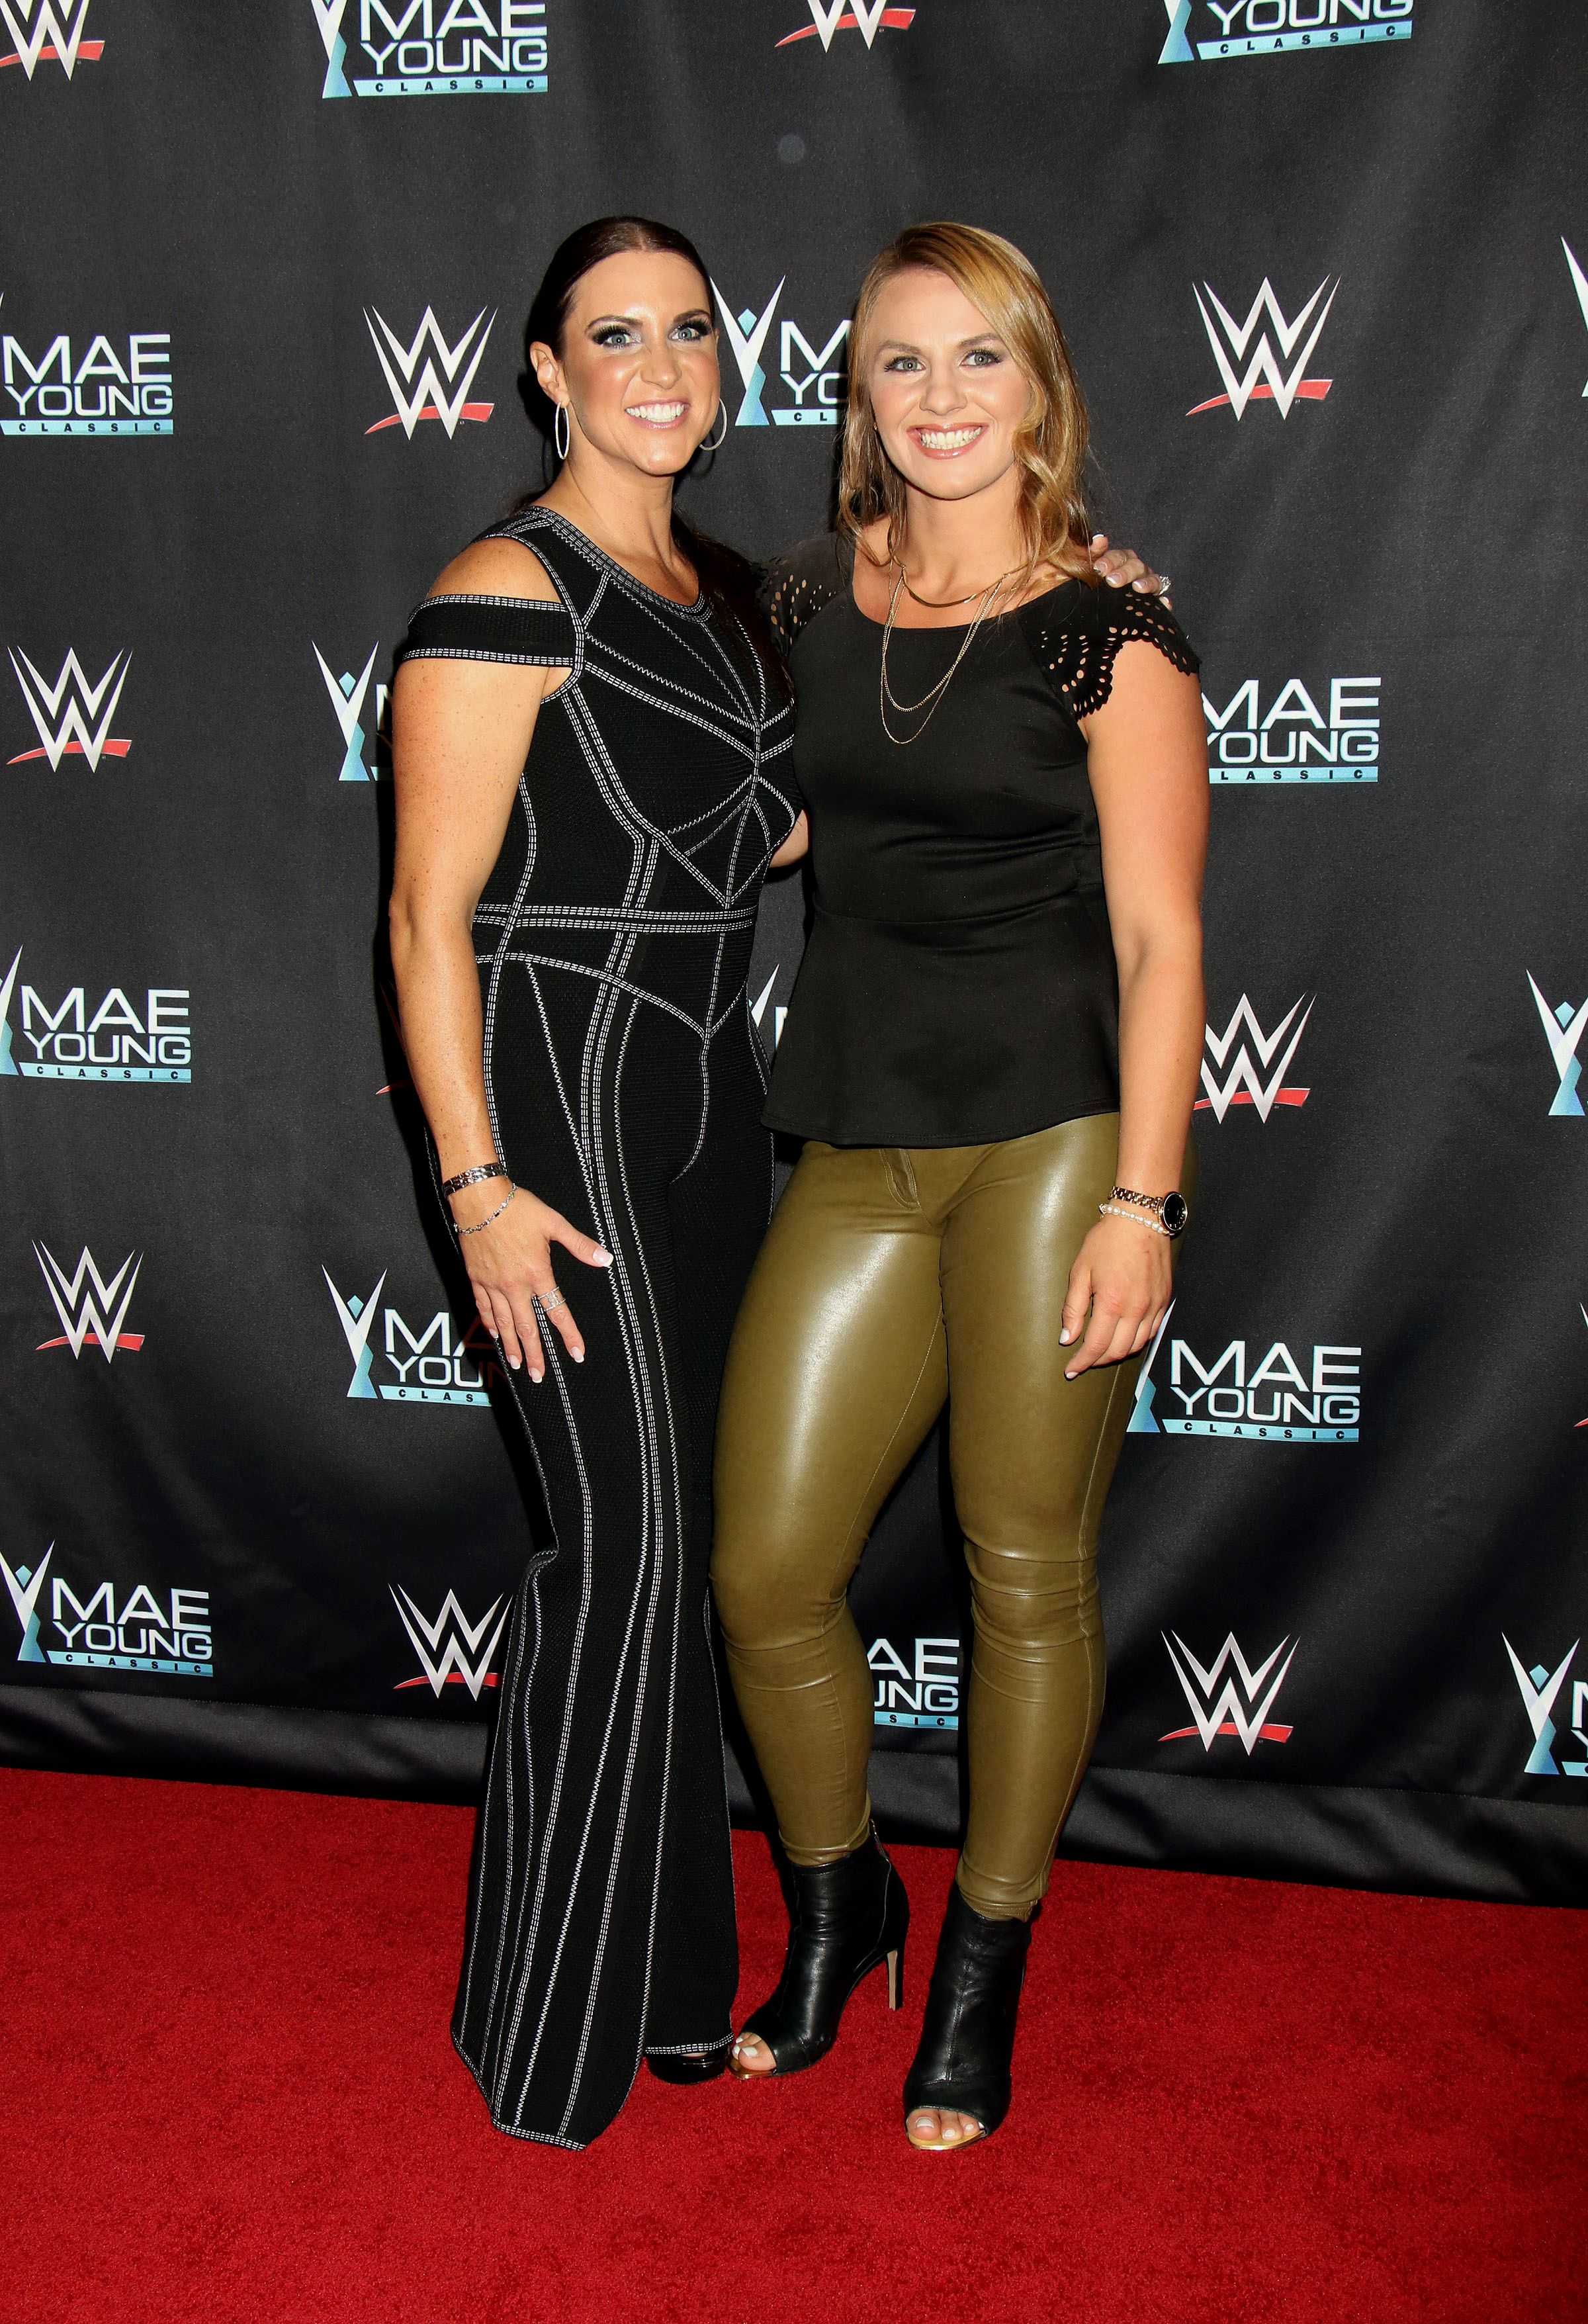 Erica Wiebe at WWE presents the ‘Mae Young Clasic’ event